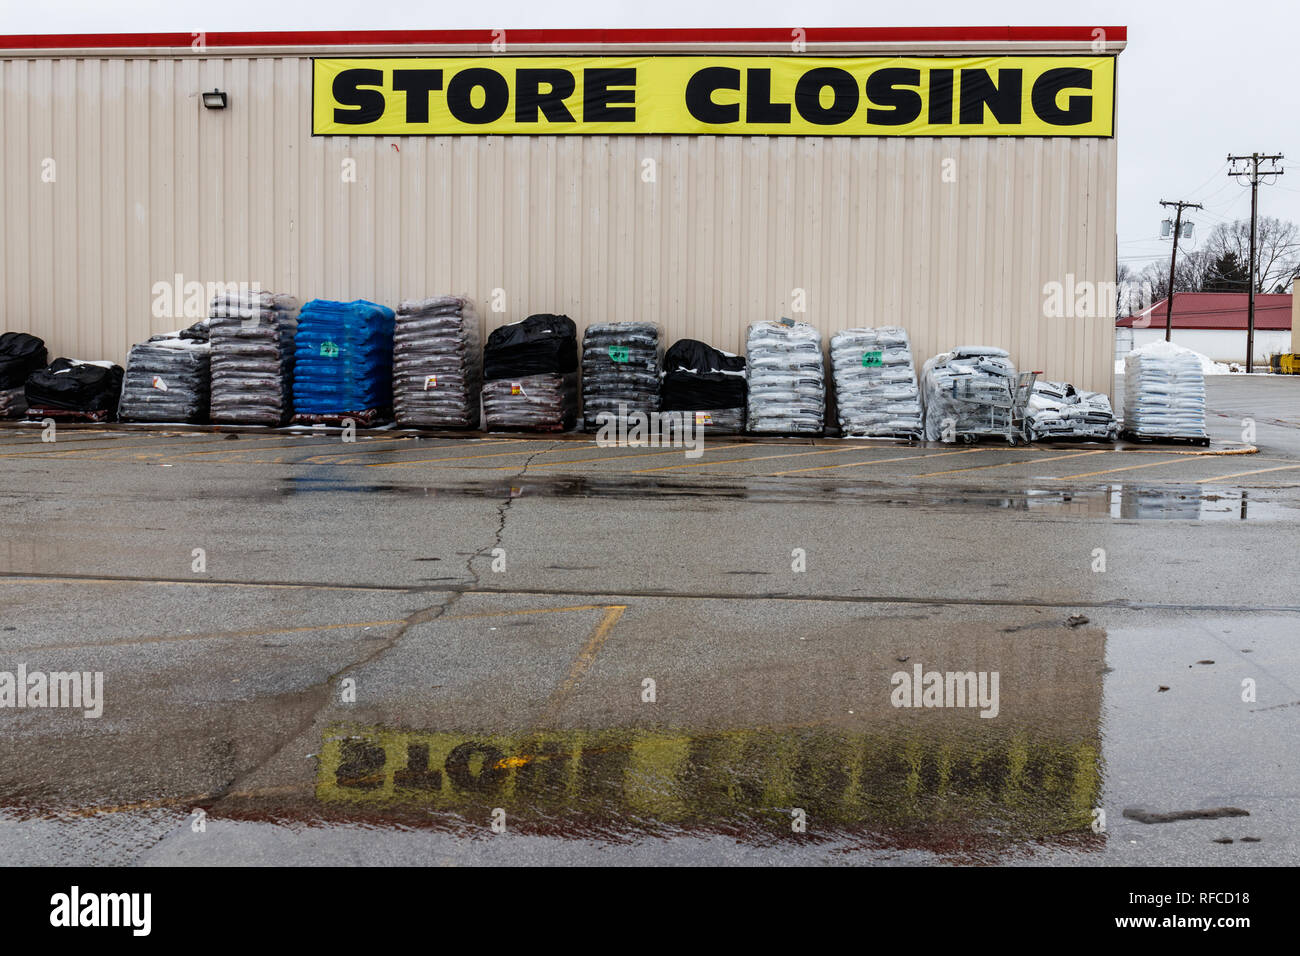 Peru - Circa January 2019: Store Closing signs at a Kmart Retail Location. Sears Holdings filed for bankruptcy VI Stock Photo